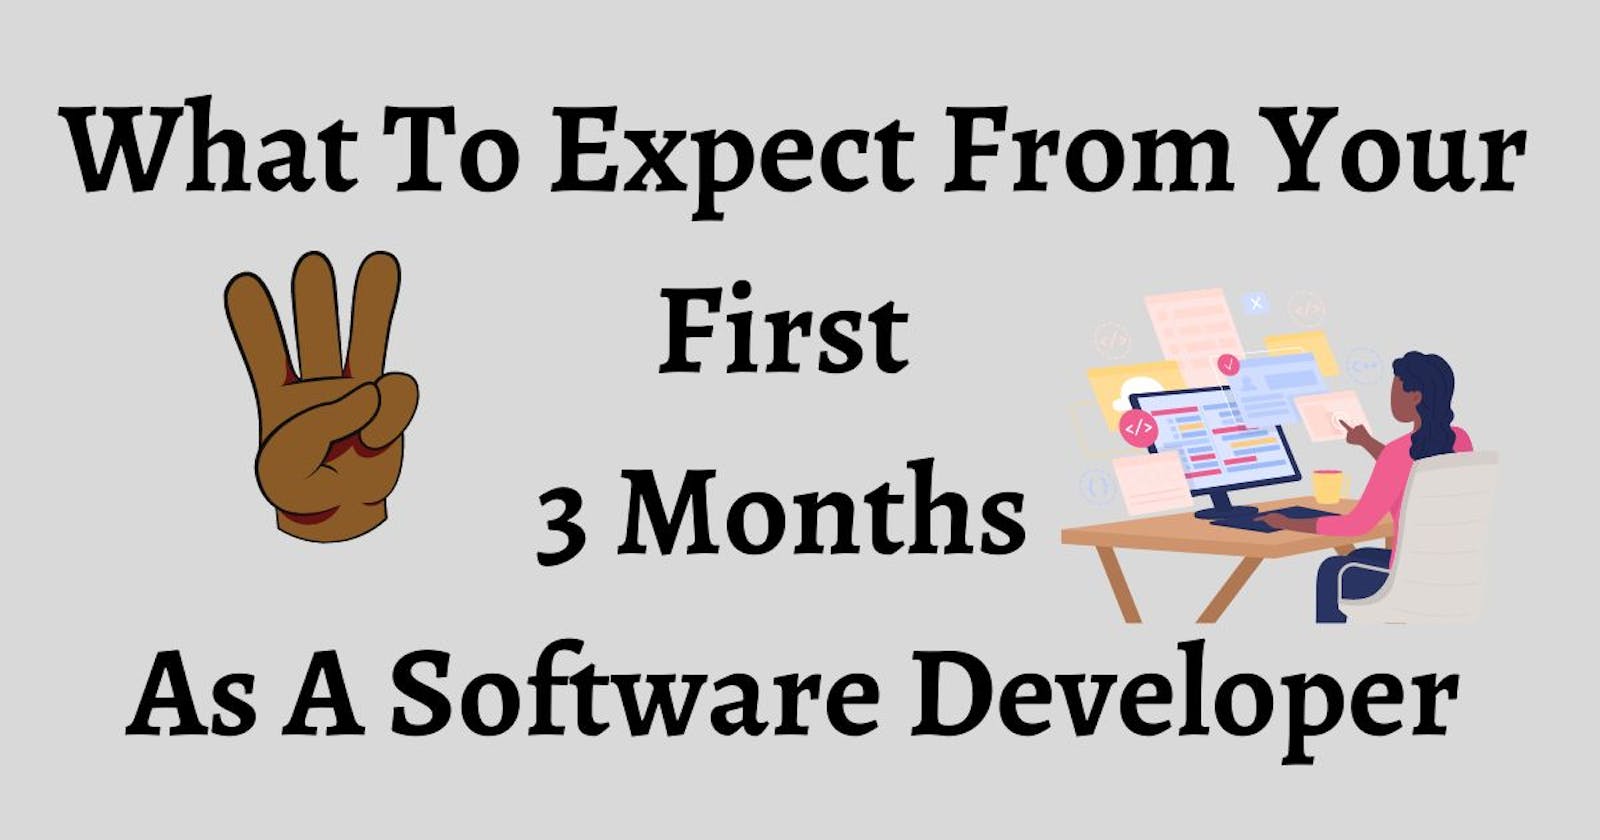 What To Expect From Your First 3 Months As A Software Developer